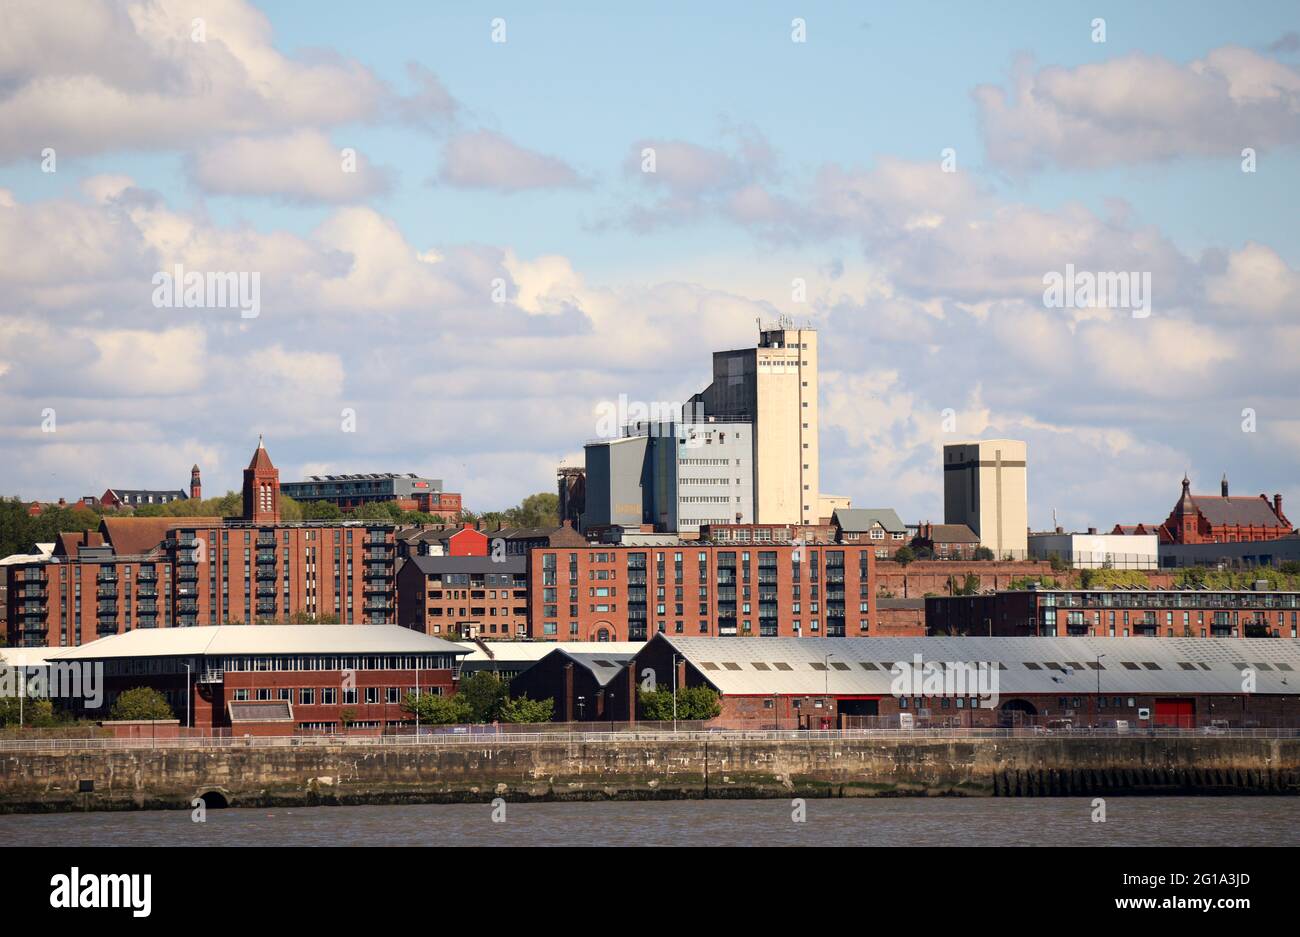 ADM Milling on the south Liverpool skyline viewed from the River Mersey Stock Photo